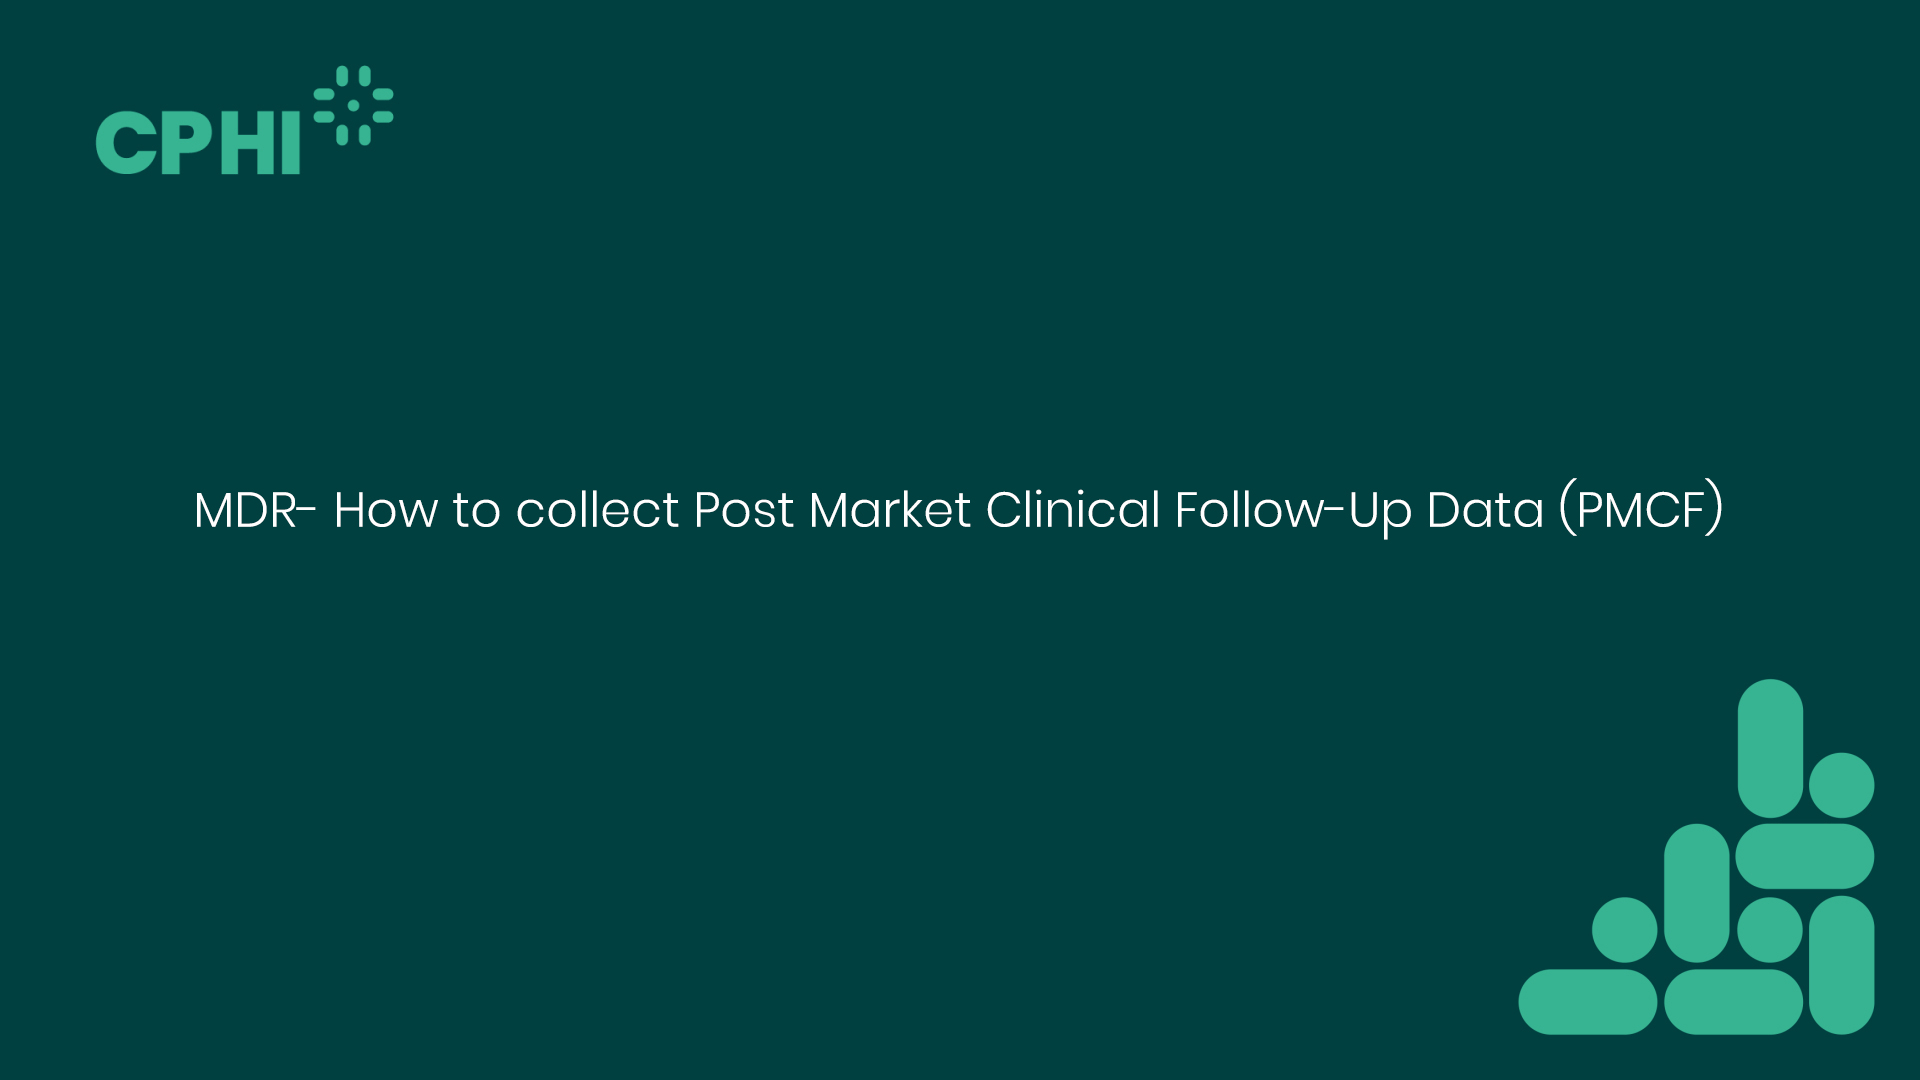 MDR- How to collect Post Market Clinical Follow-Up Data (PMCF)